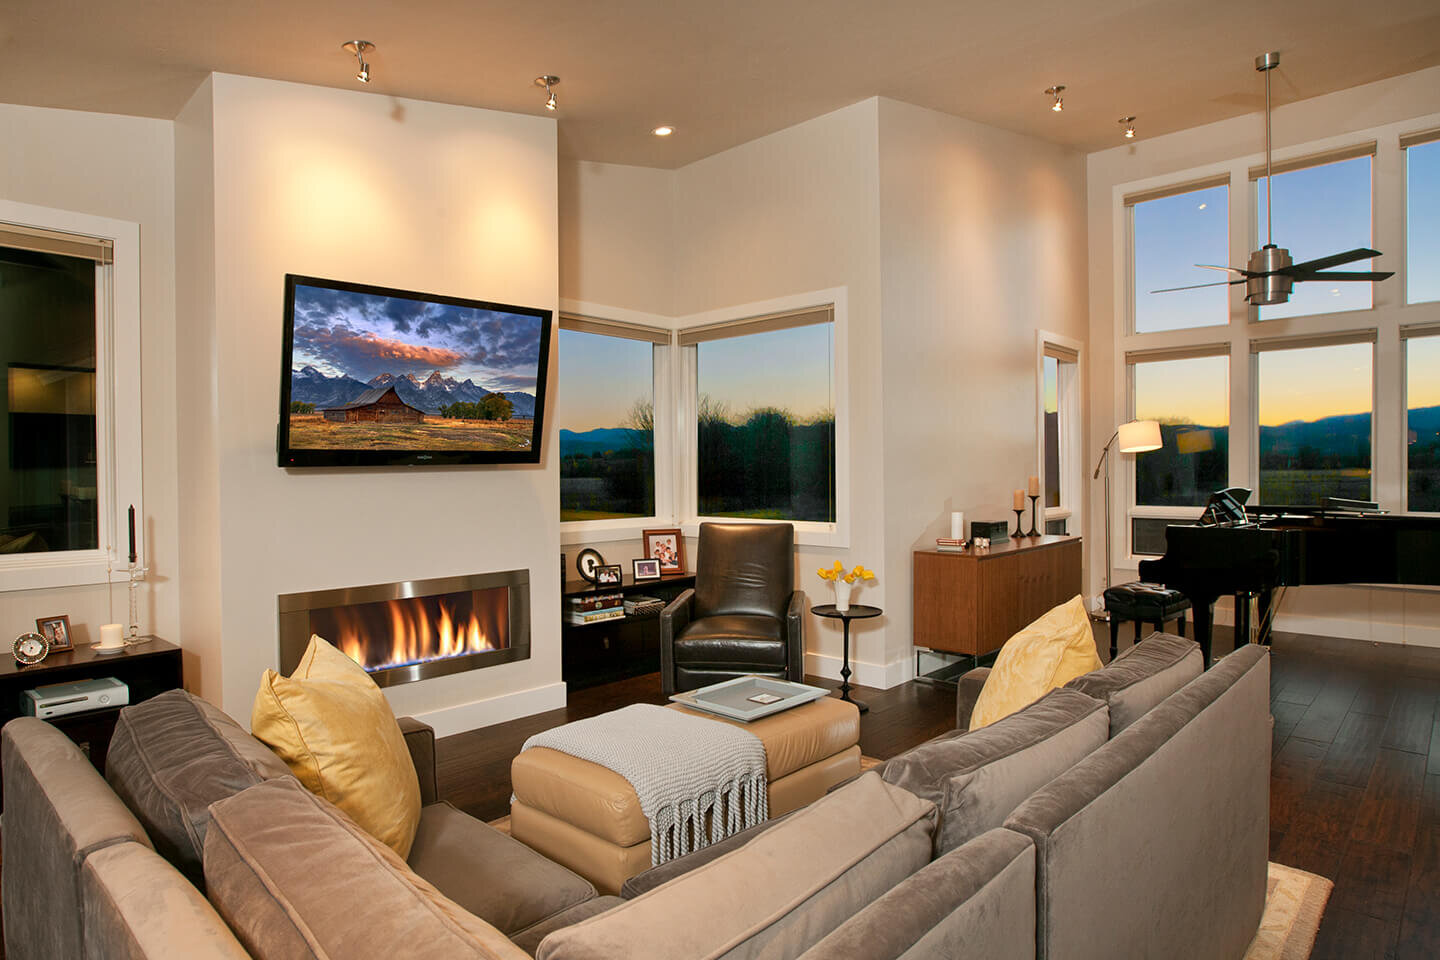 Living room with lit up gas fireplace and large windows